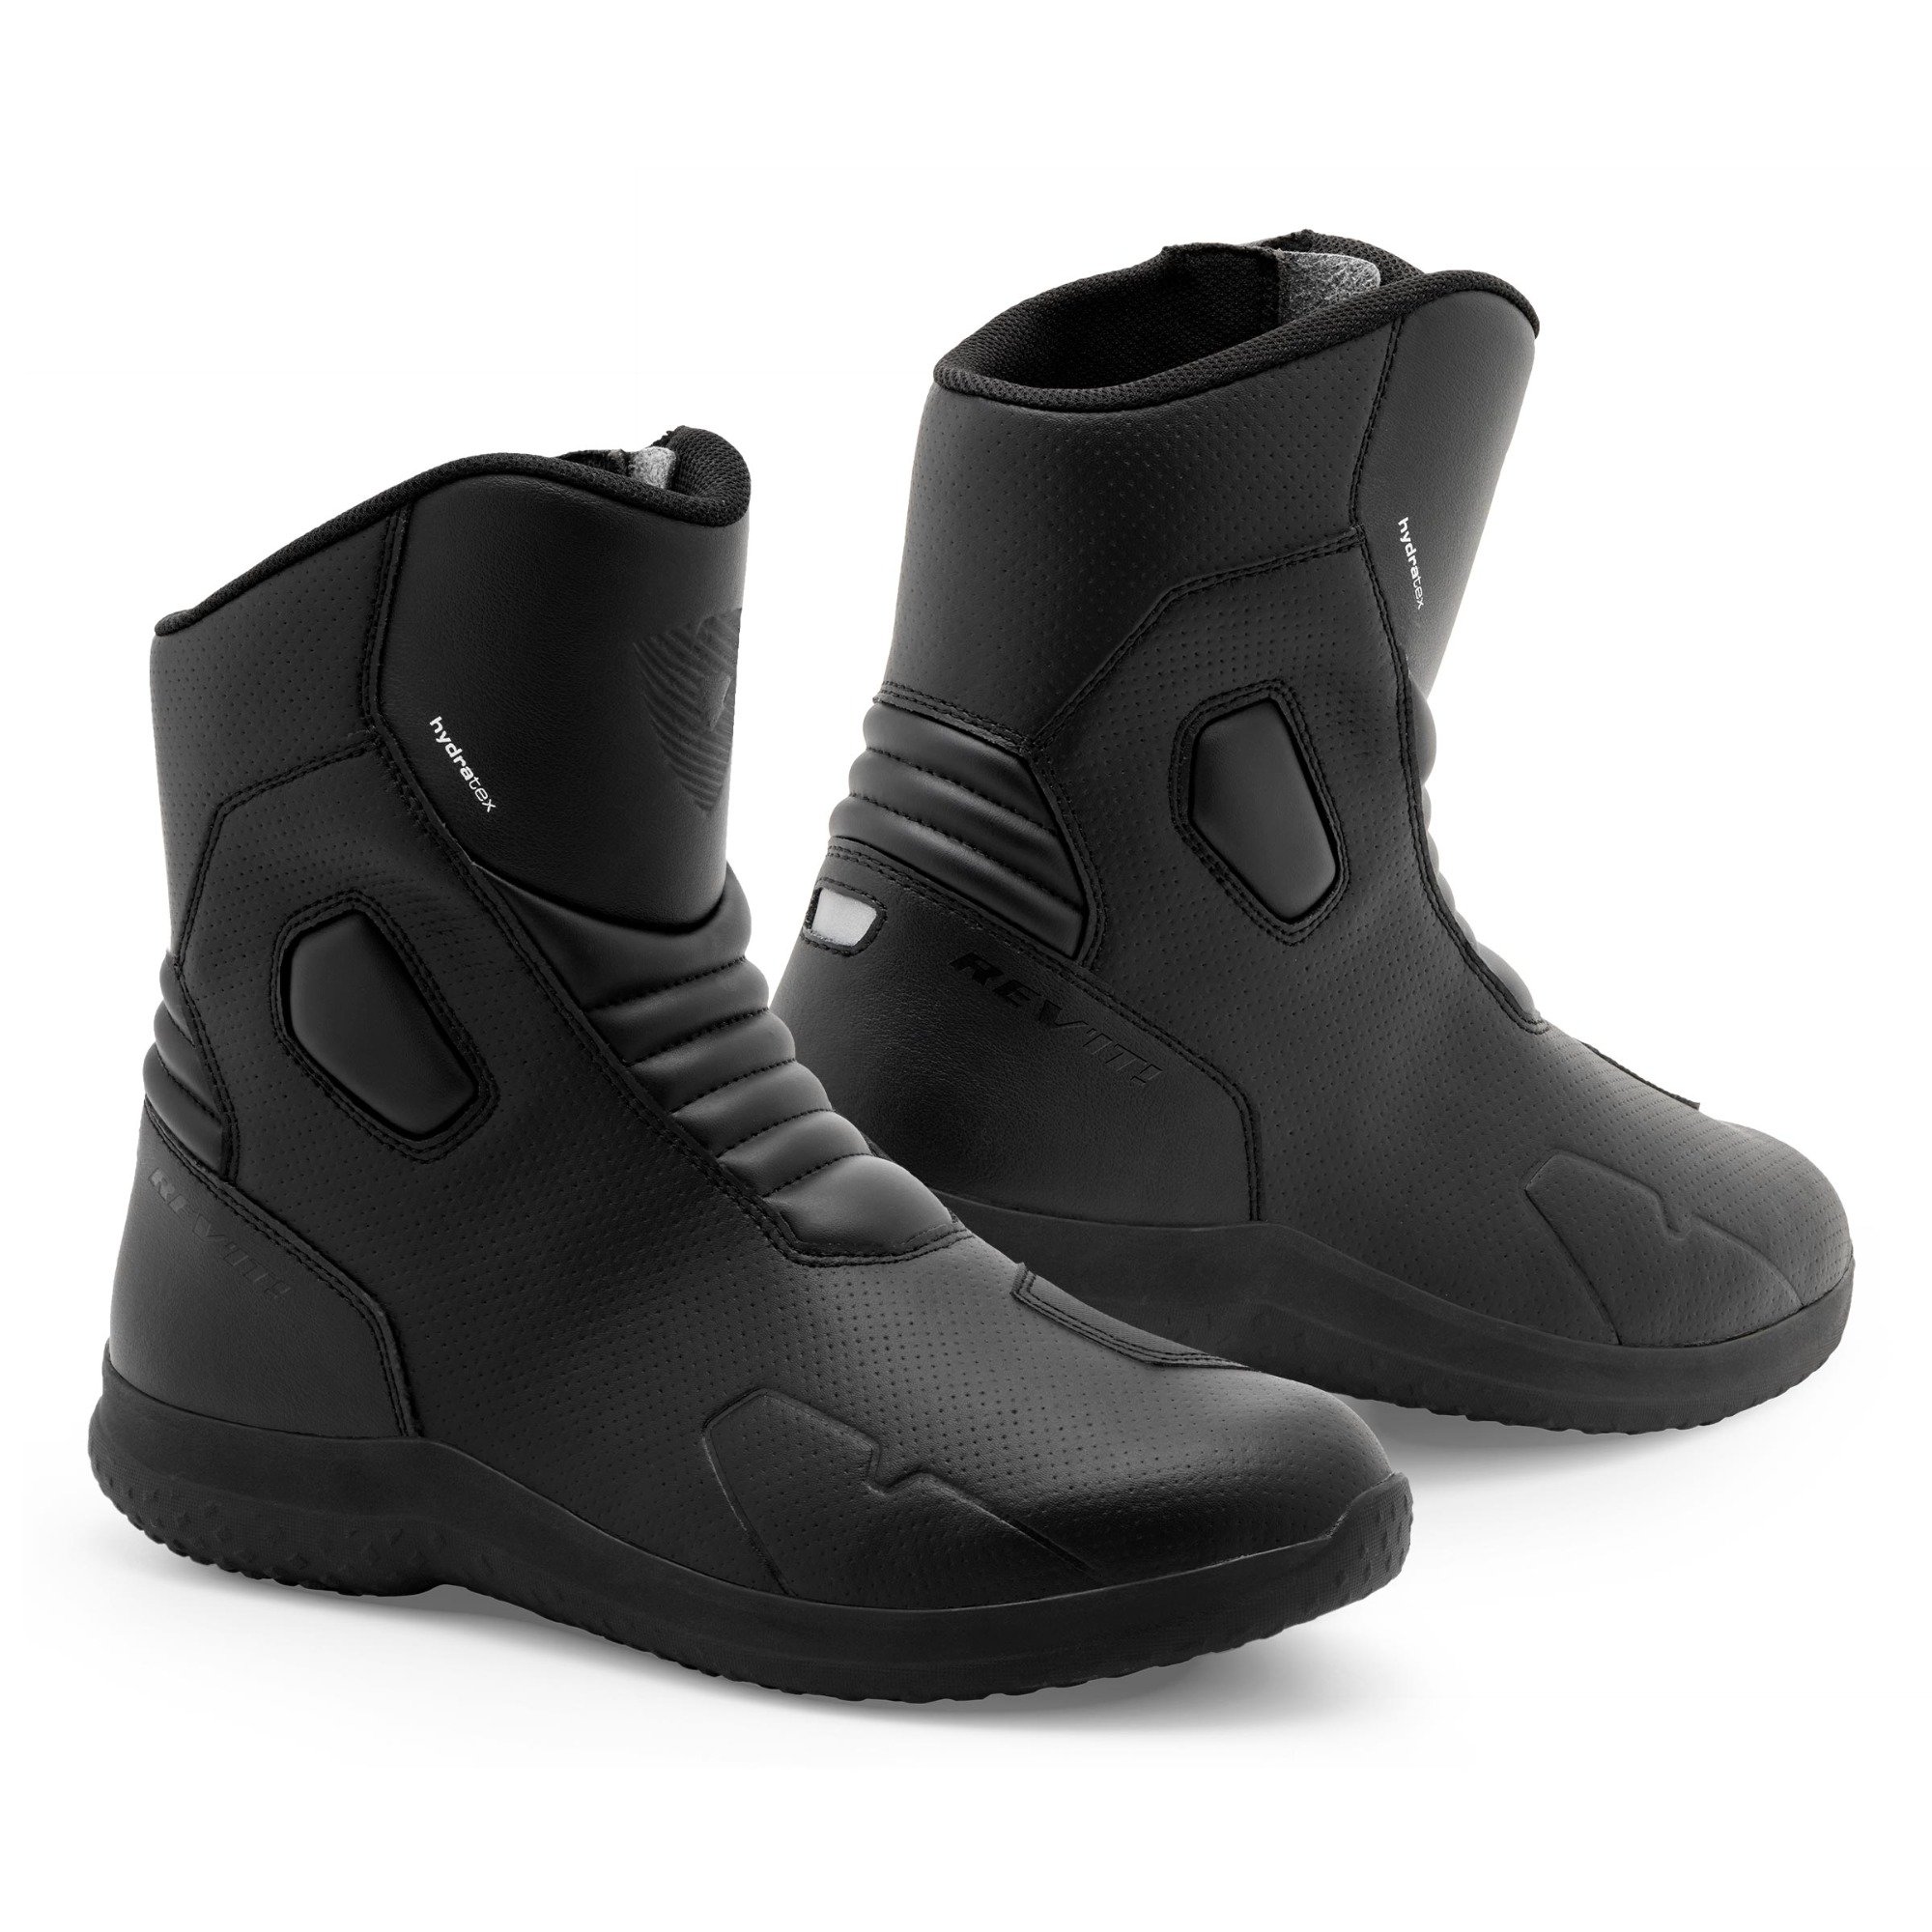 Image of REV'IT! Boots Fuse H2O Black Size 40 ID 8700001330374